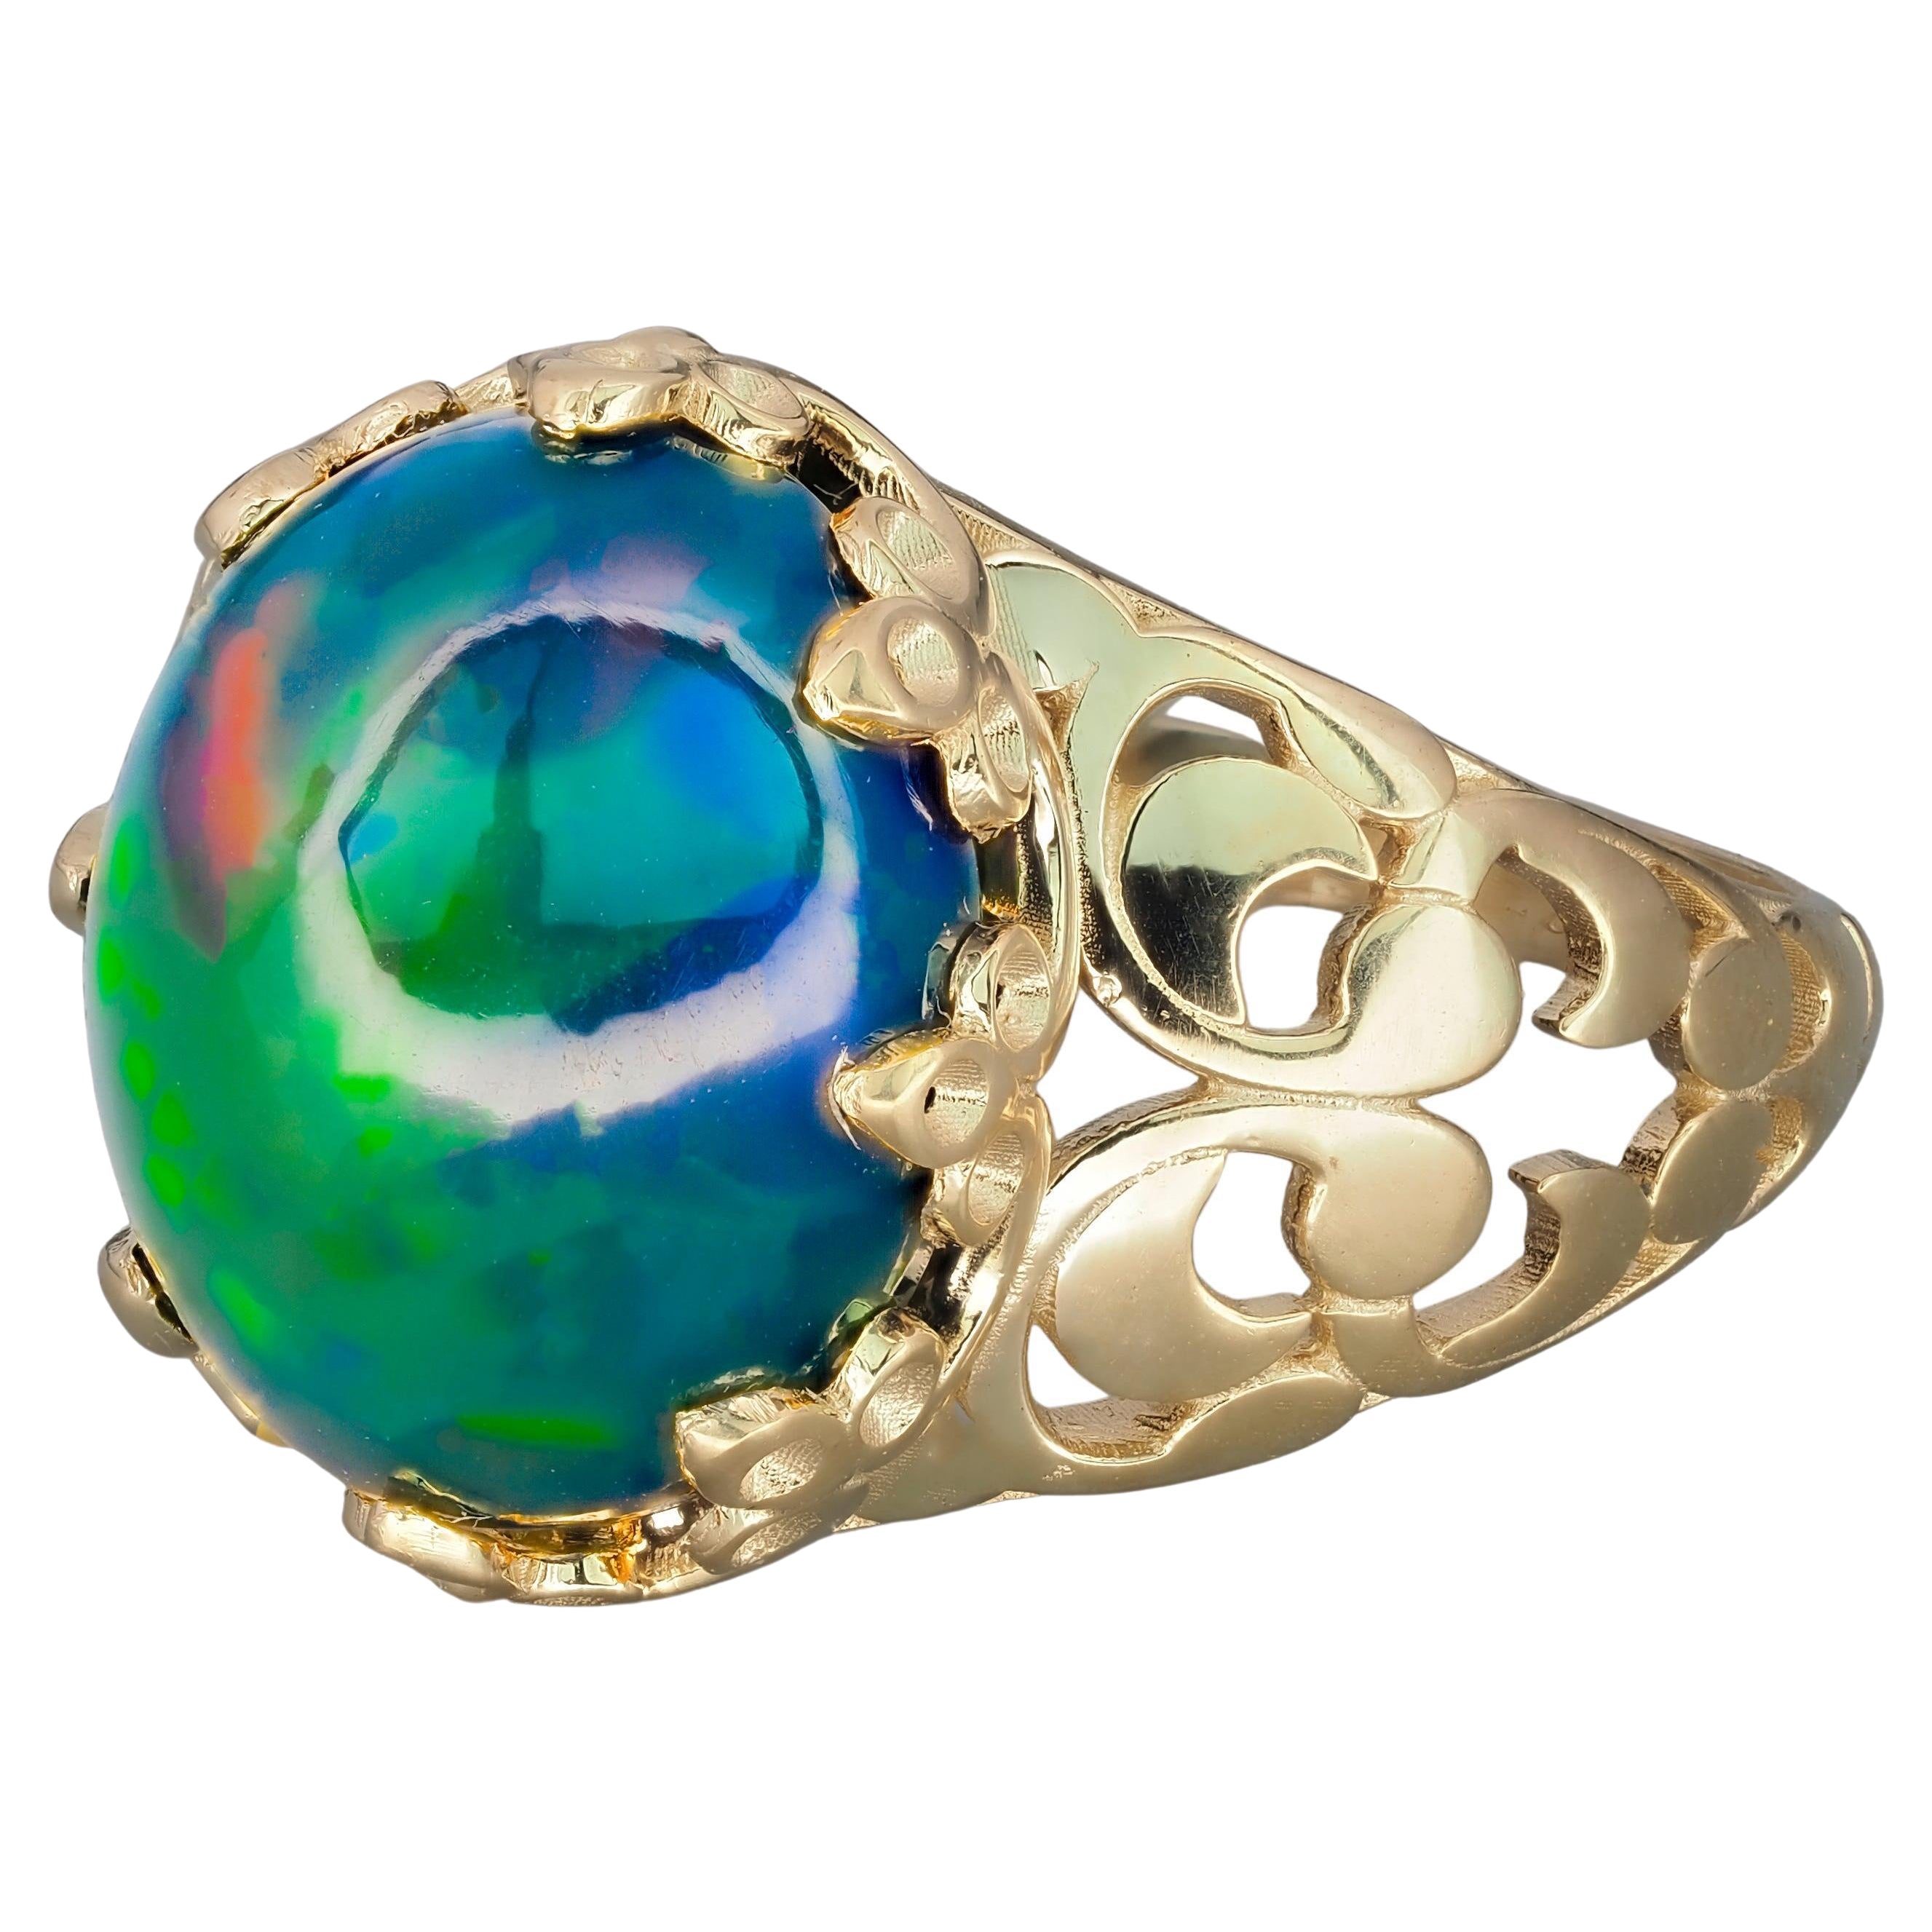 For Sale:  Black Opal Vitage Style Ring in 14 Karat Gold, Ethiopian Opal Cabochon Ring